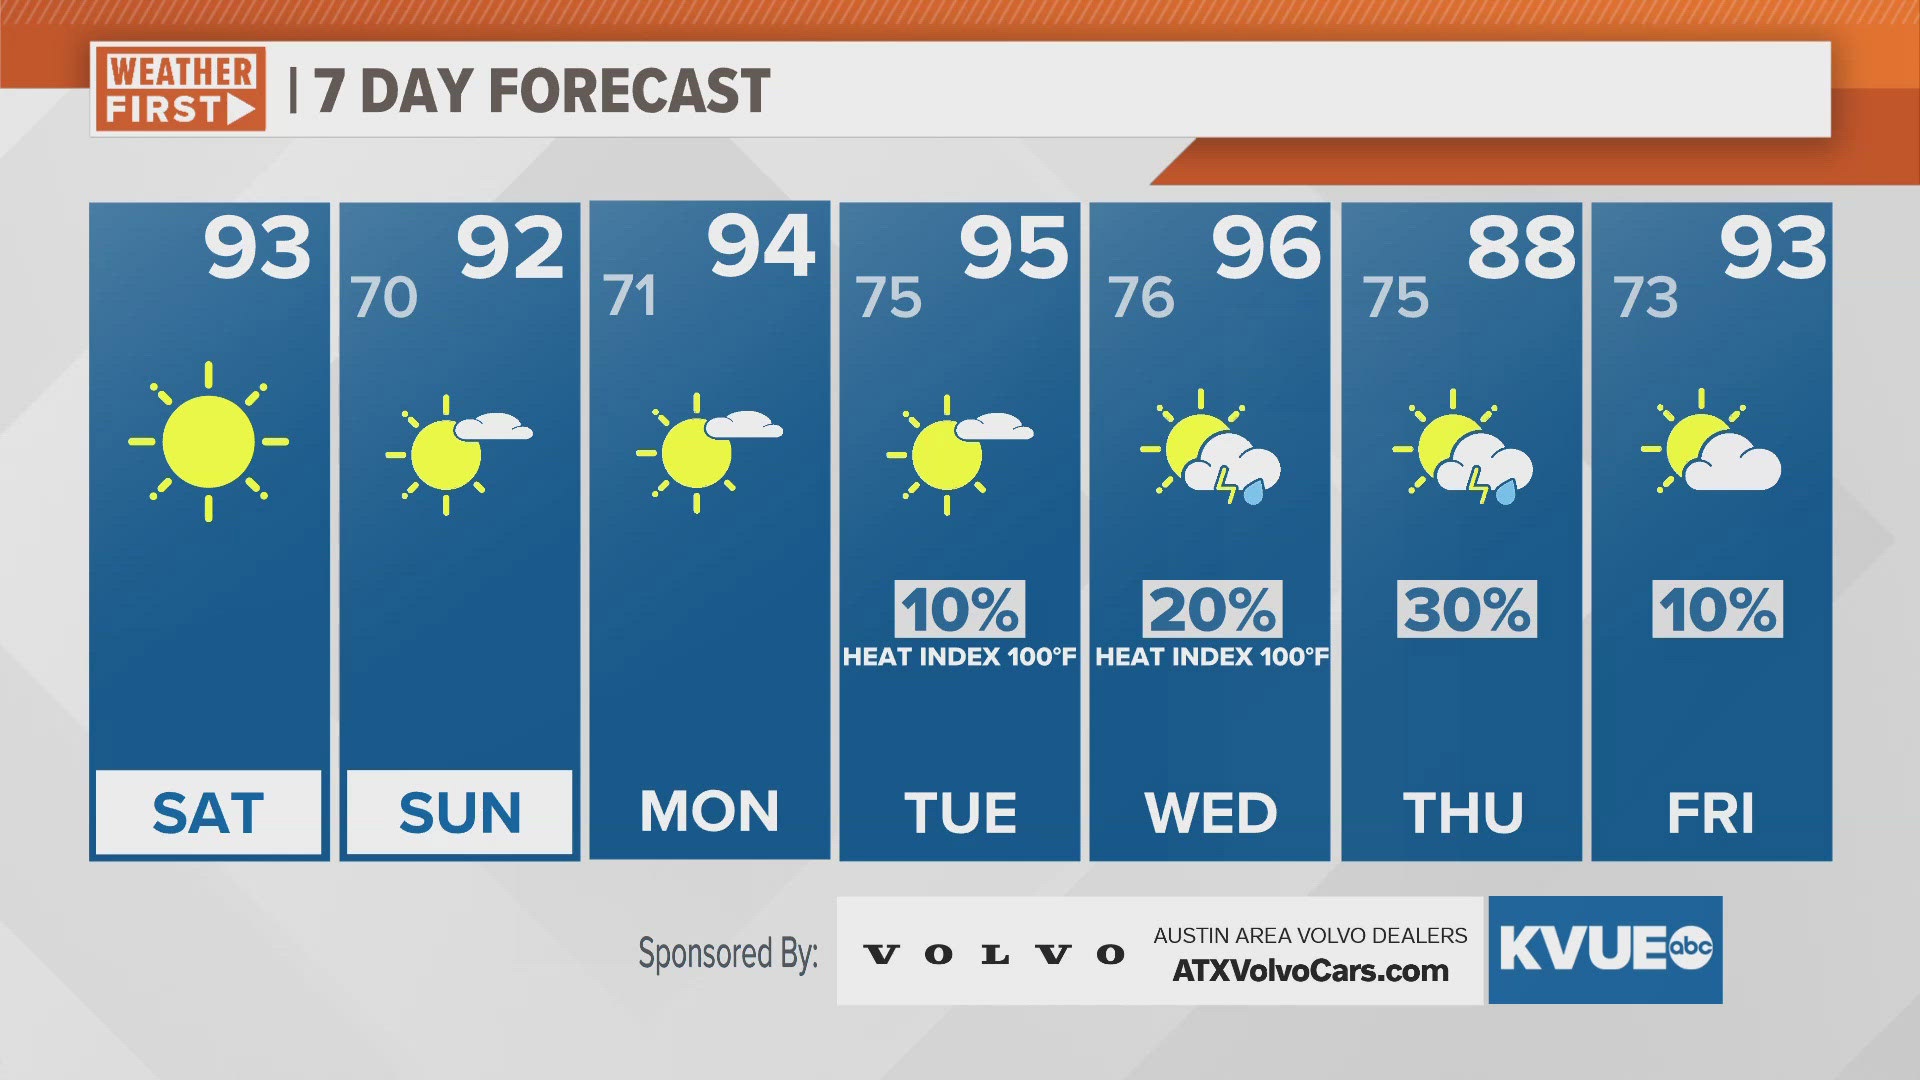 Hot and sunny this weekend. More humid next week.